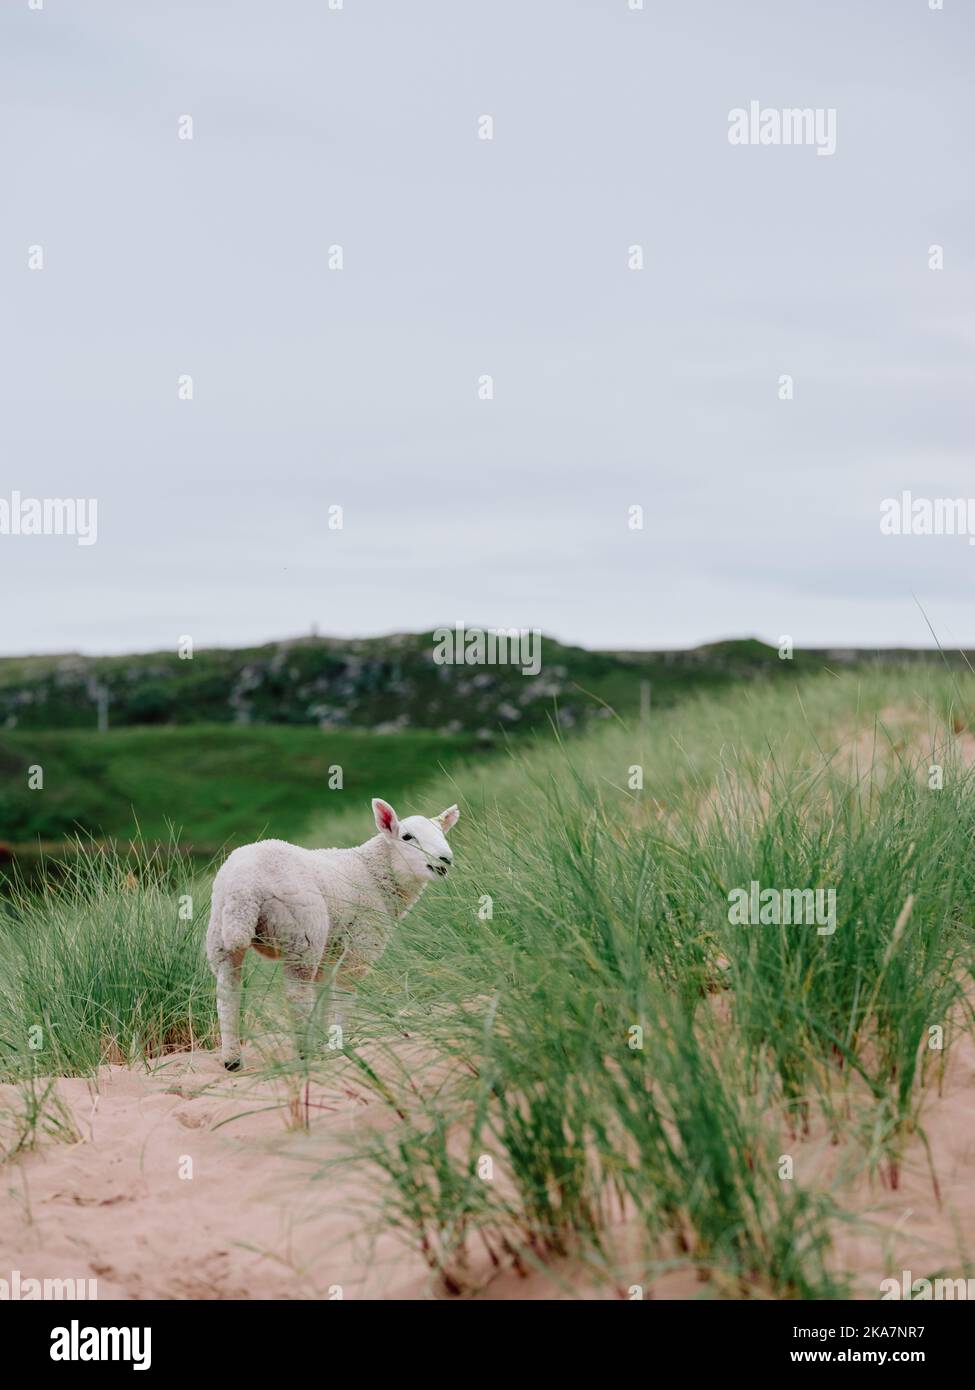 A sheep in the sand dune Marram grass landscape of Red Point beach, Gairloch on the west coast of Scotland UK Stock Photo